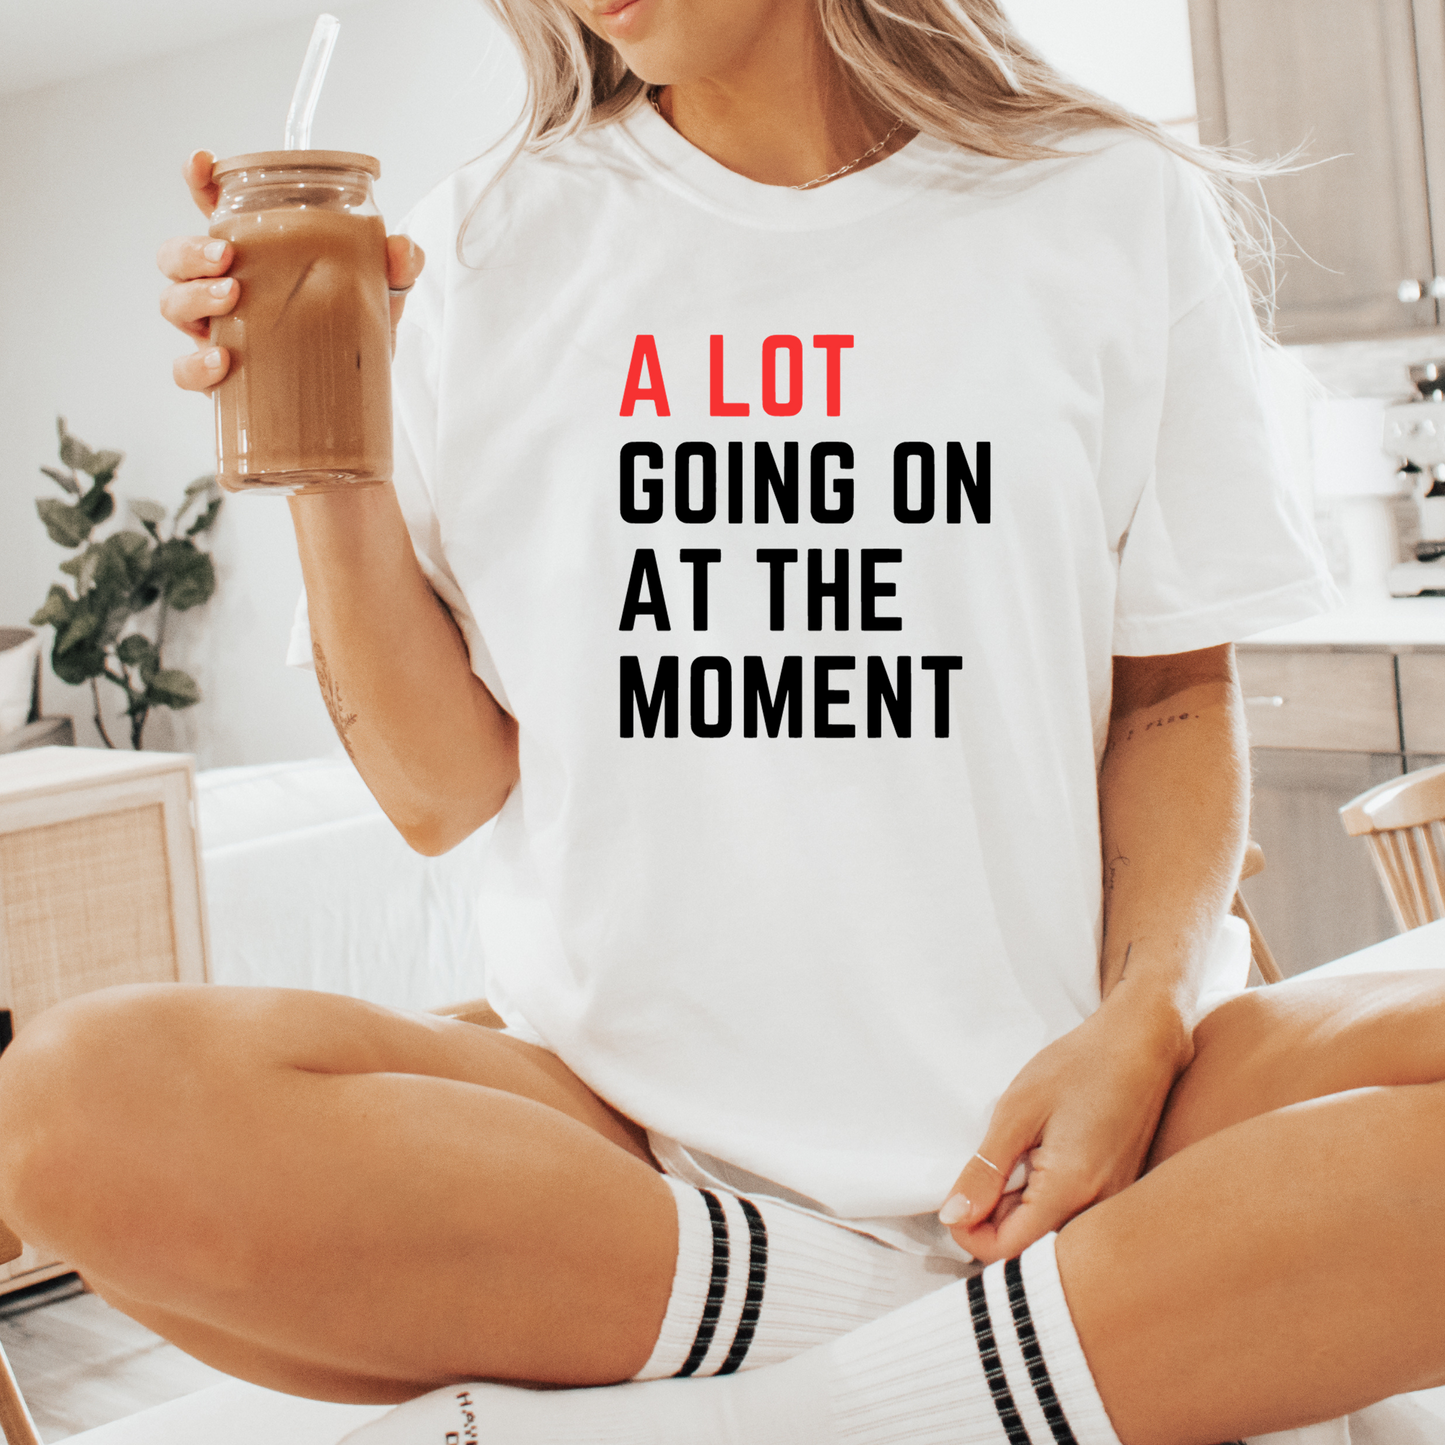 T Swift inspired t-shirt | Alot Going on |  Adult T-shirt